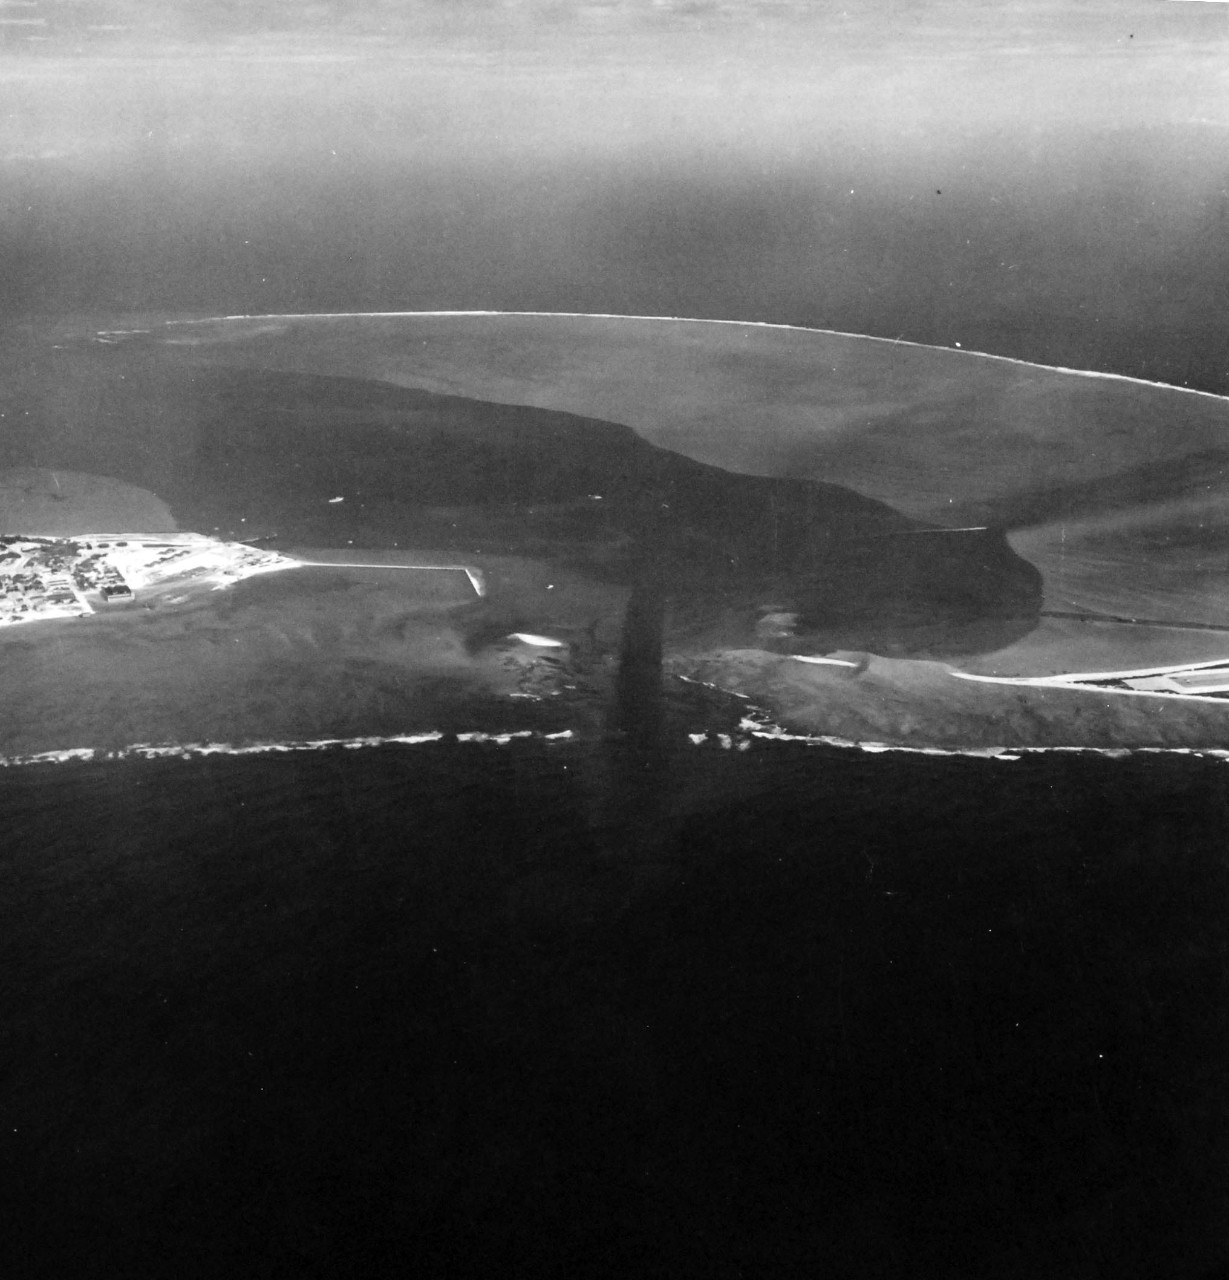 80-G-451087:  Midway Islands, November 1941:  Channel between Eastern with Sand Island, looking North.  Photographed by Wolf, November 24, 1941.   U.S. Navy photograph, now in the collections of the National Archives.   (2015/11/03).